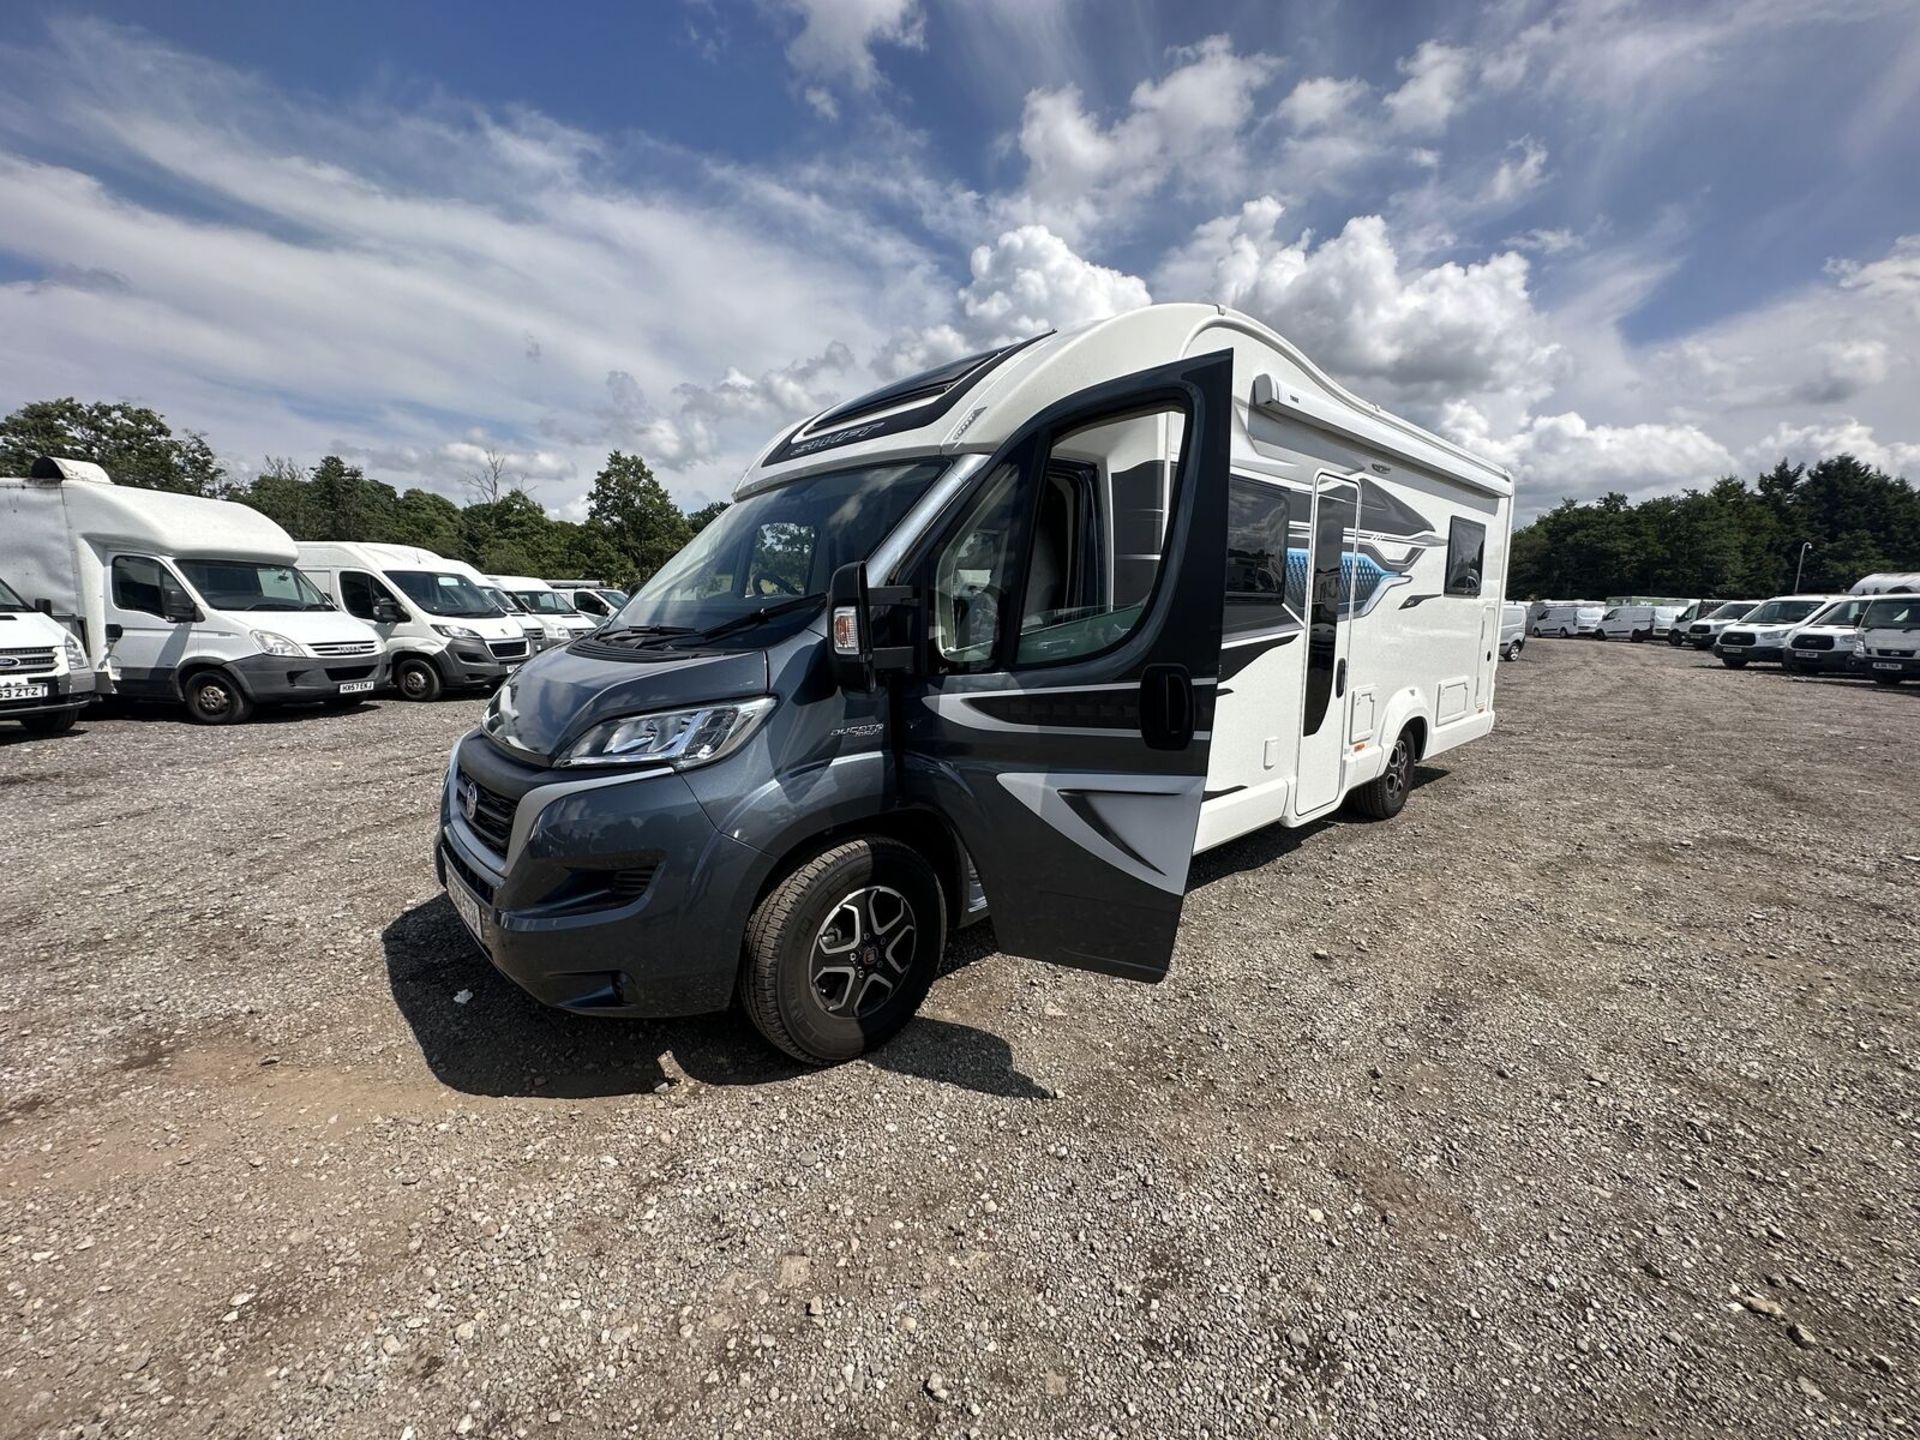 COMFORT CRUSADER: FIAT DUCATO SWIFT ESCAPE 674 WITH LUXURIOUS FEATURES